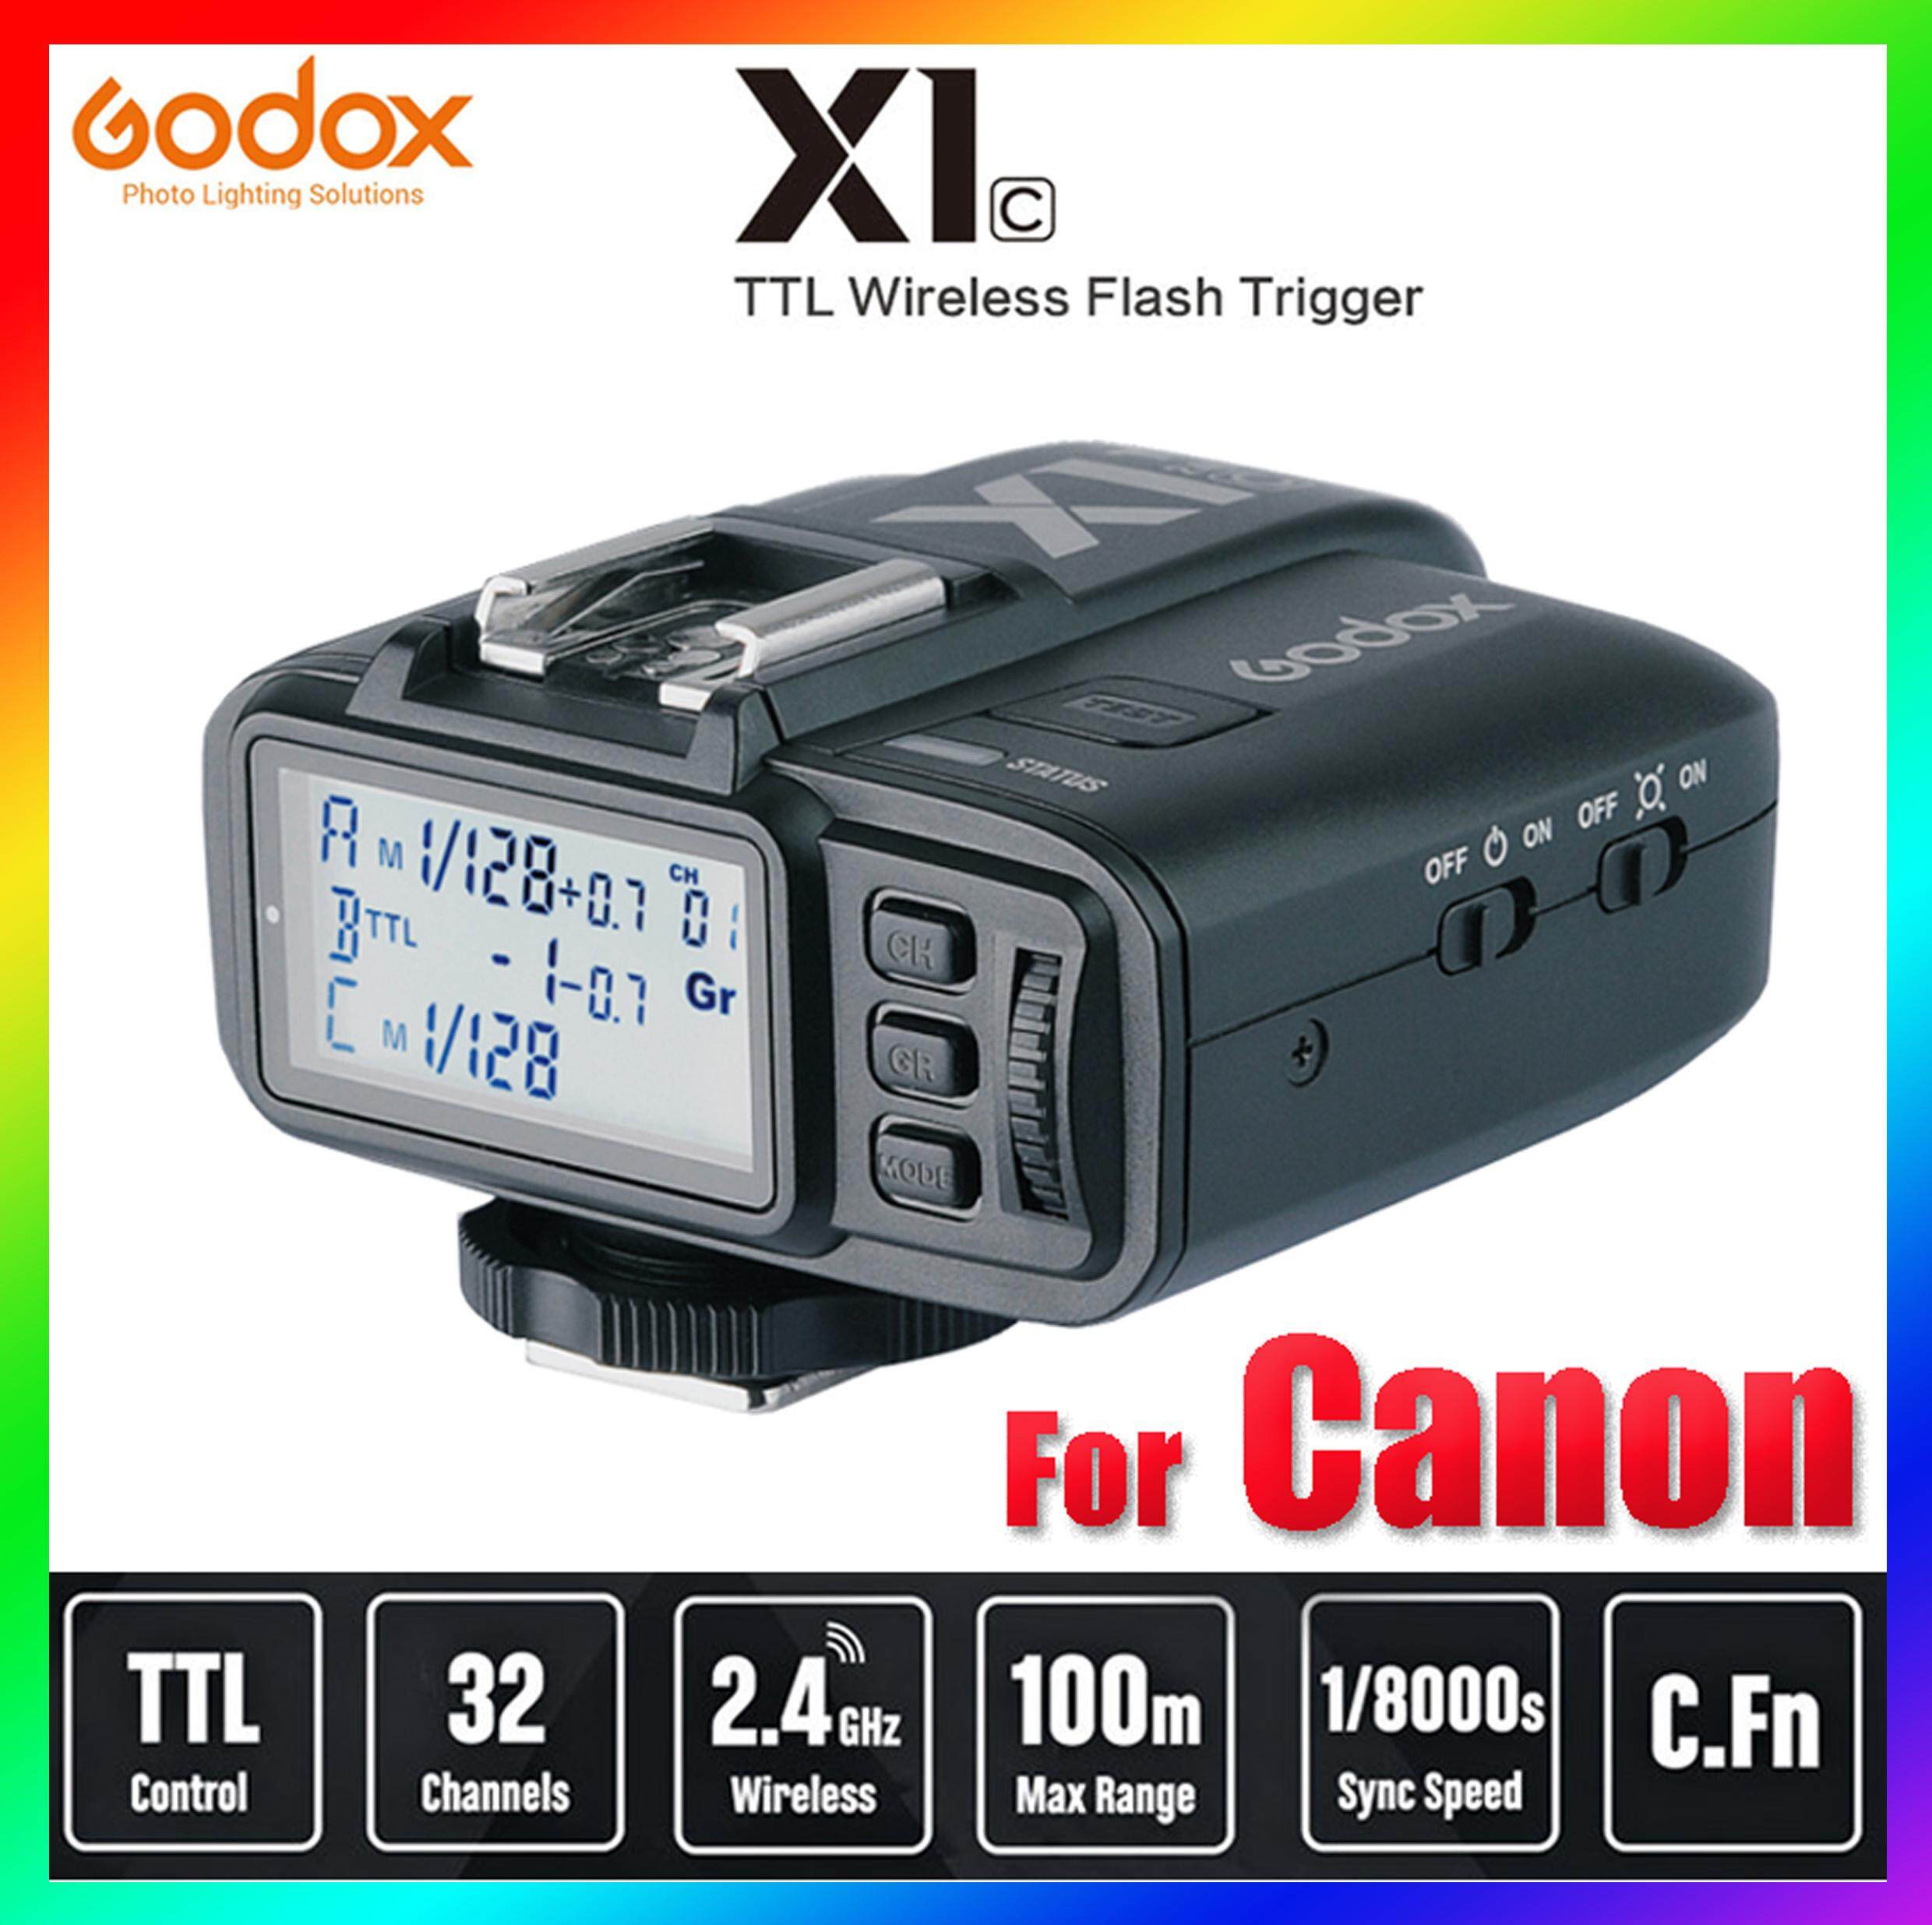 Godox X1T-C TTL Wireless Flash Trigger Transmitter for Canon (รับประกันสินค้า 1 ปี)